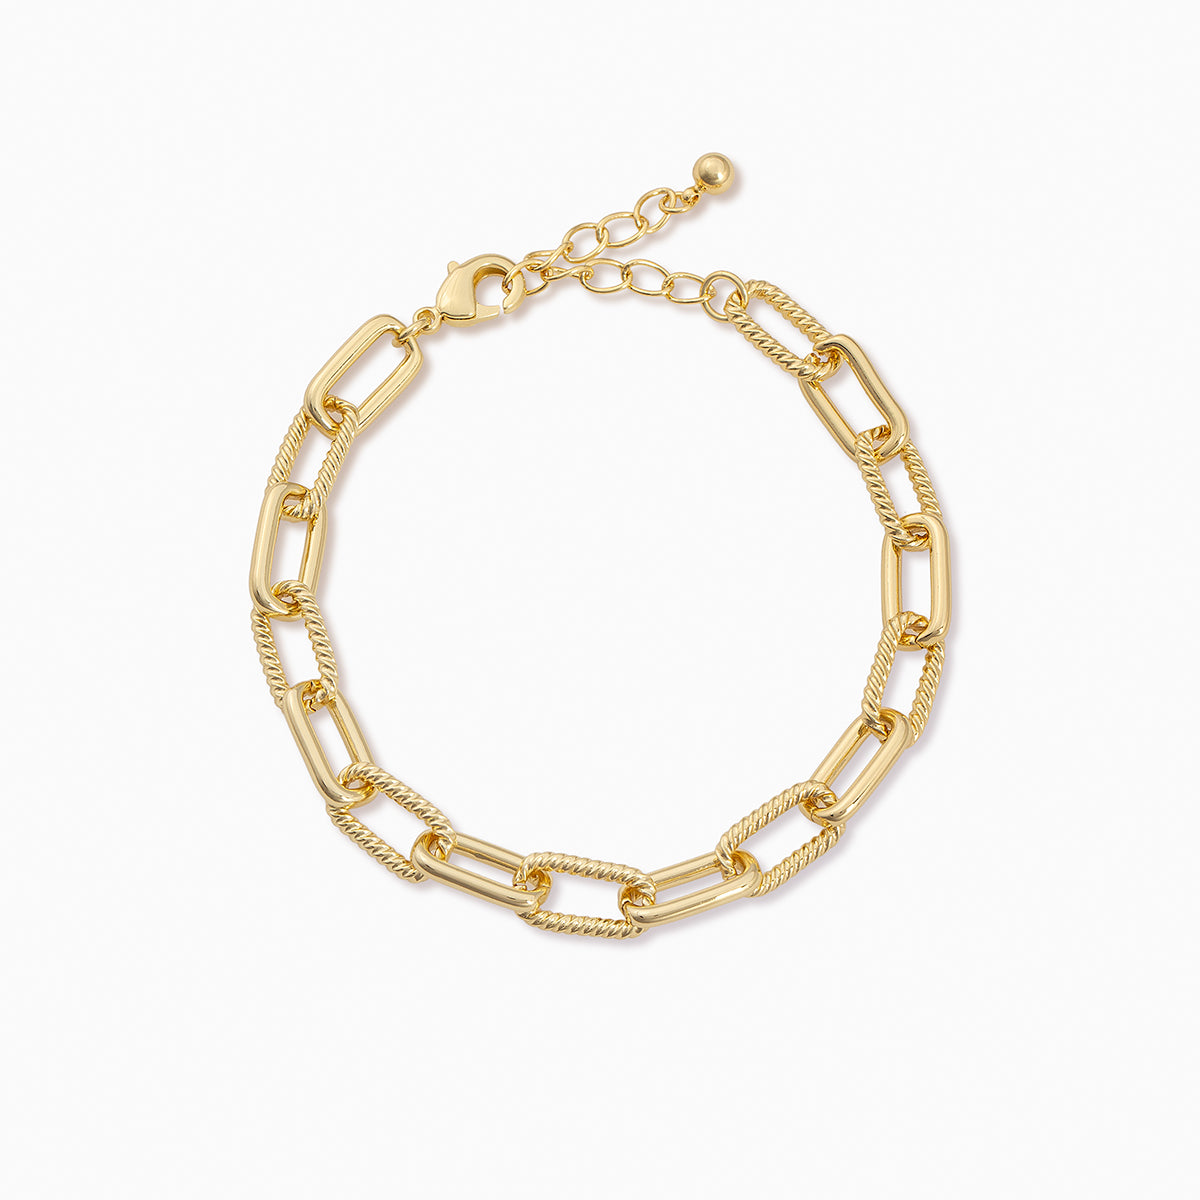 Gold Linked Chain Bracelet | Women's Jewelry by Uncommon James